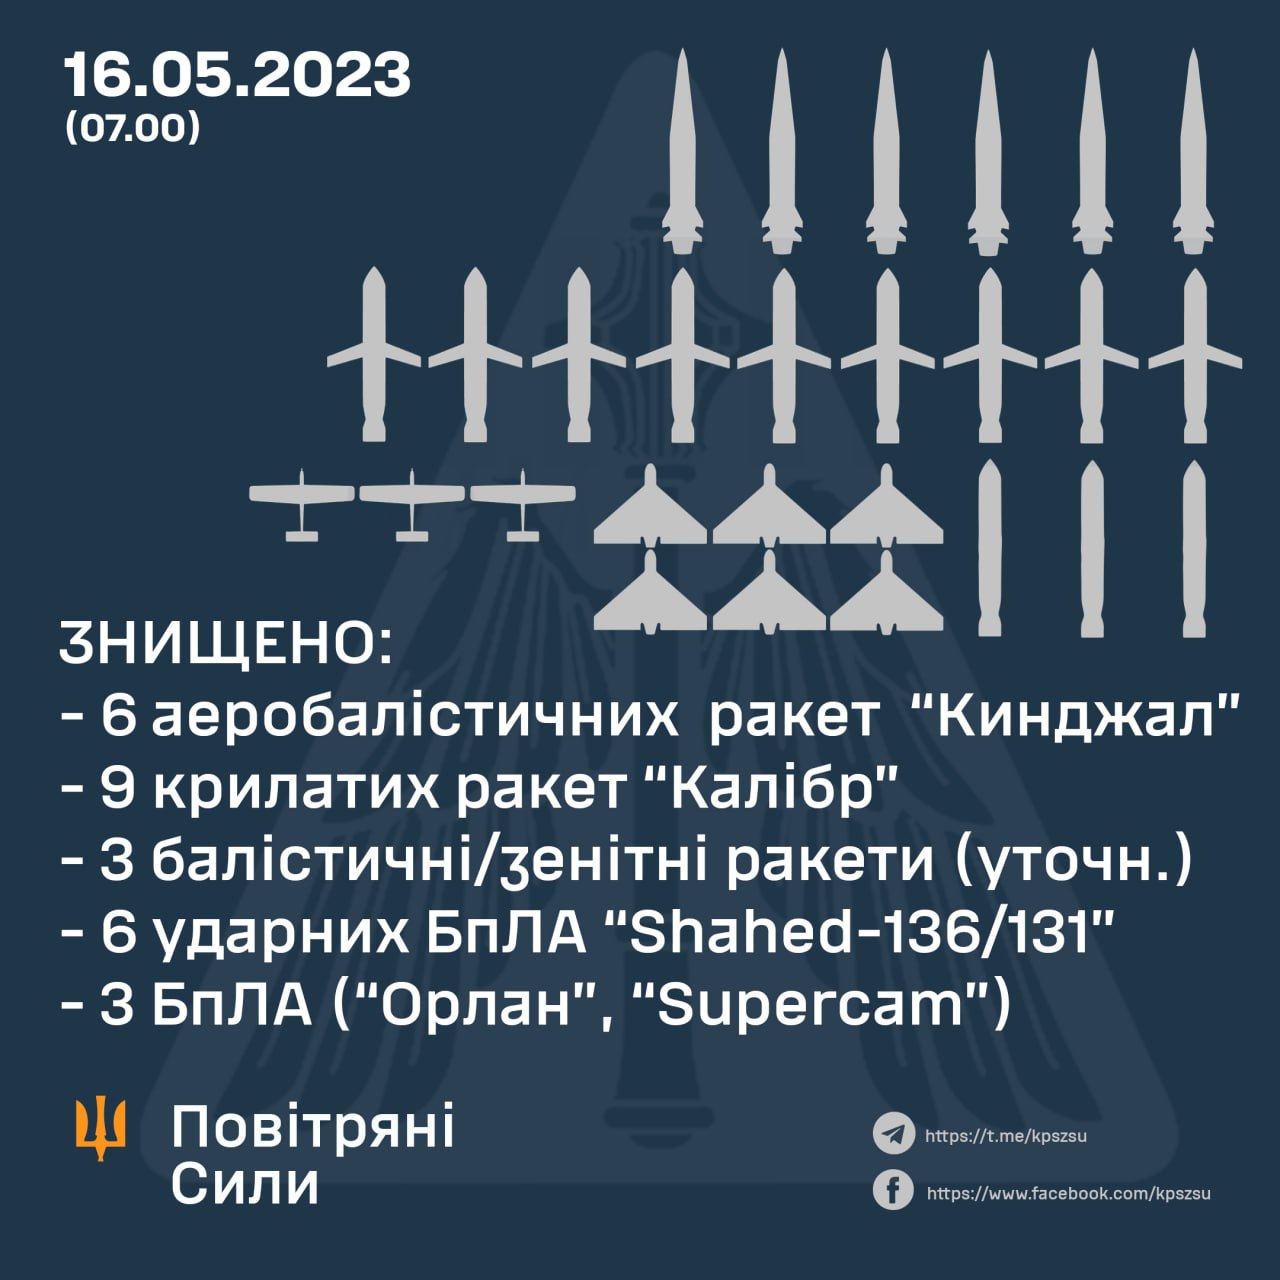 Ukrainian air defense managed to take down all sorts of air threats on May 16 night, including Kinzhal missiles, cruise missiles, reconnaissance and attack drones and yet unidentified ballistic rockets